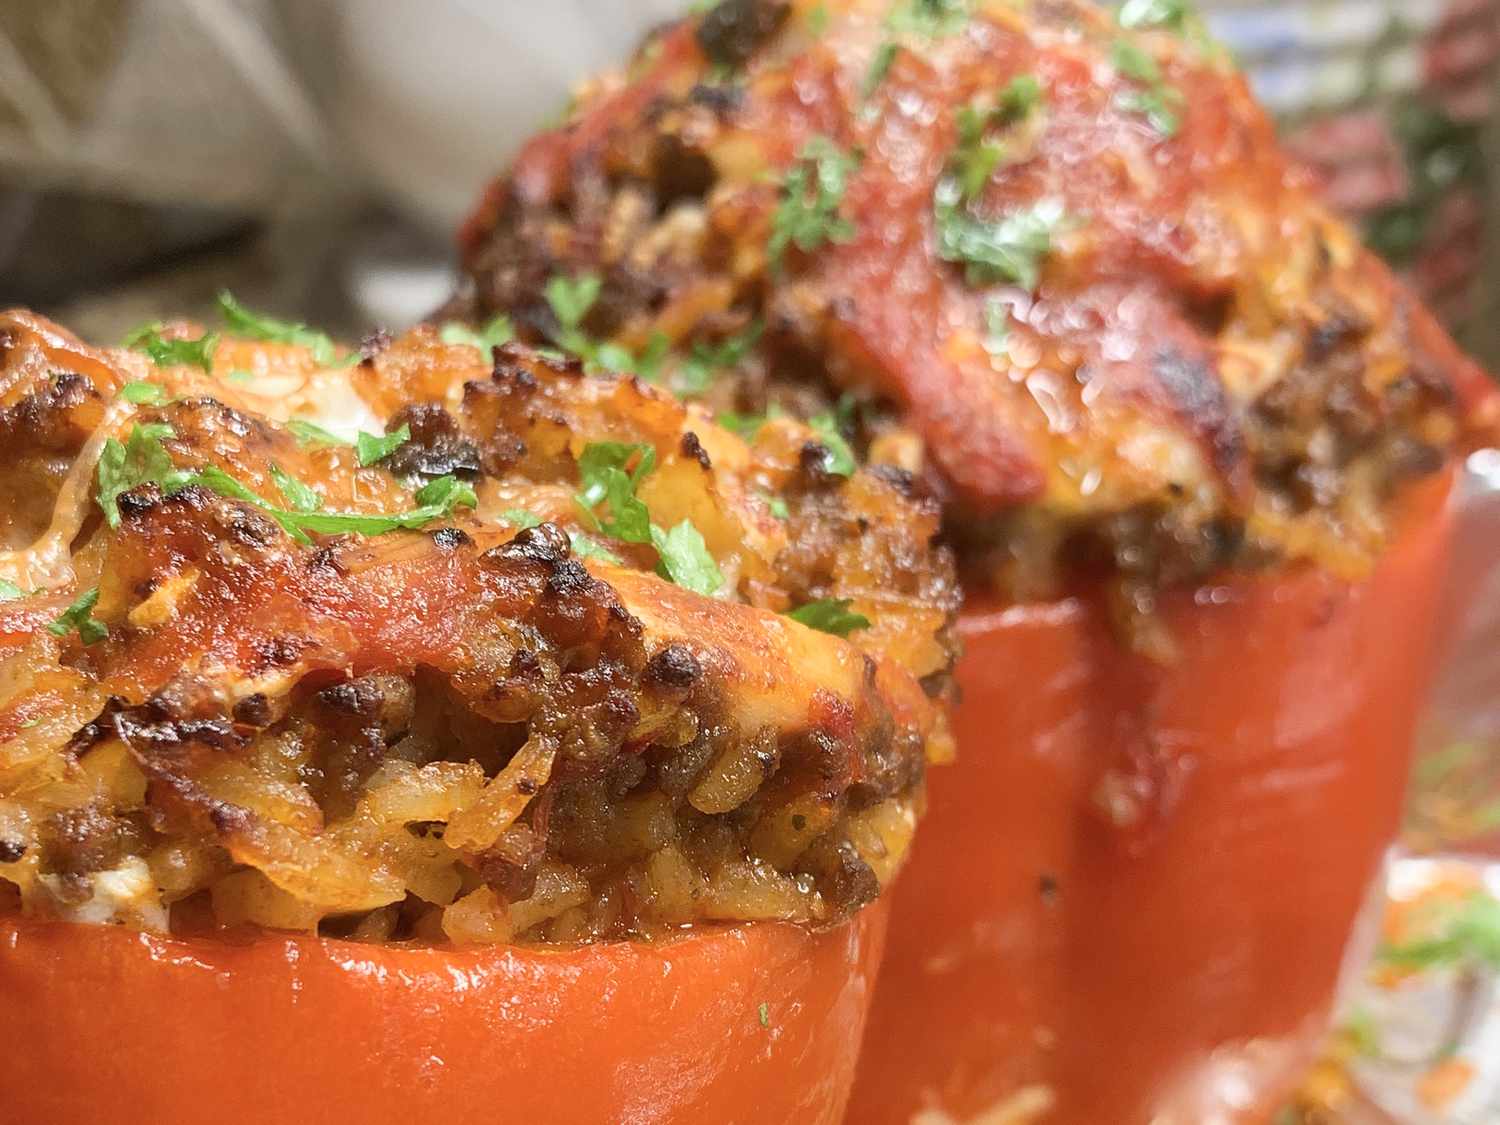 Close up view of Stuffed Red Peppers garnished with fresh herbs